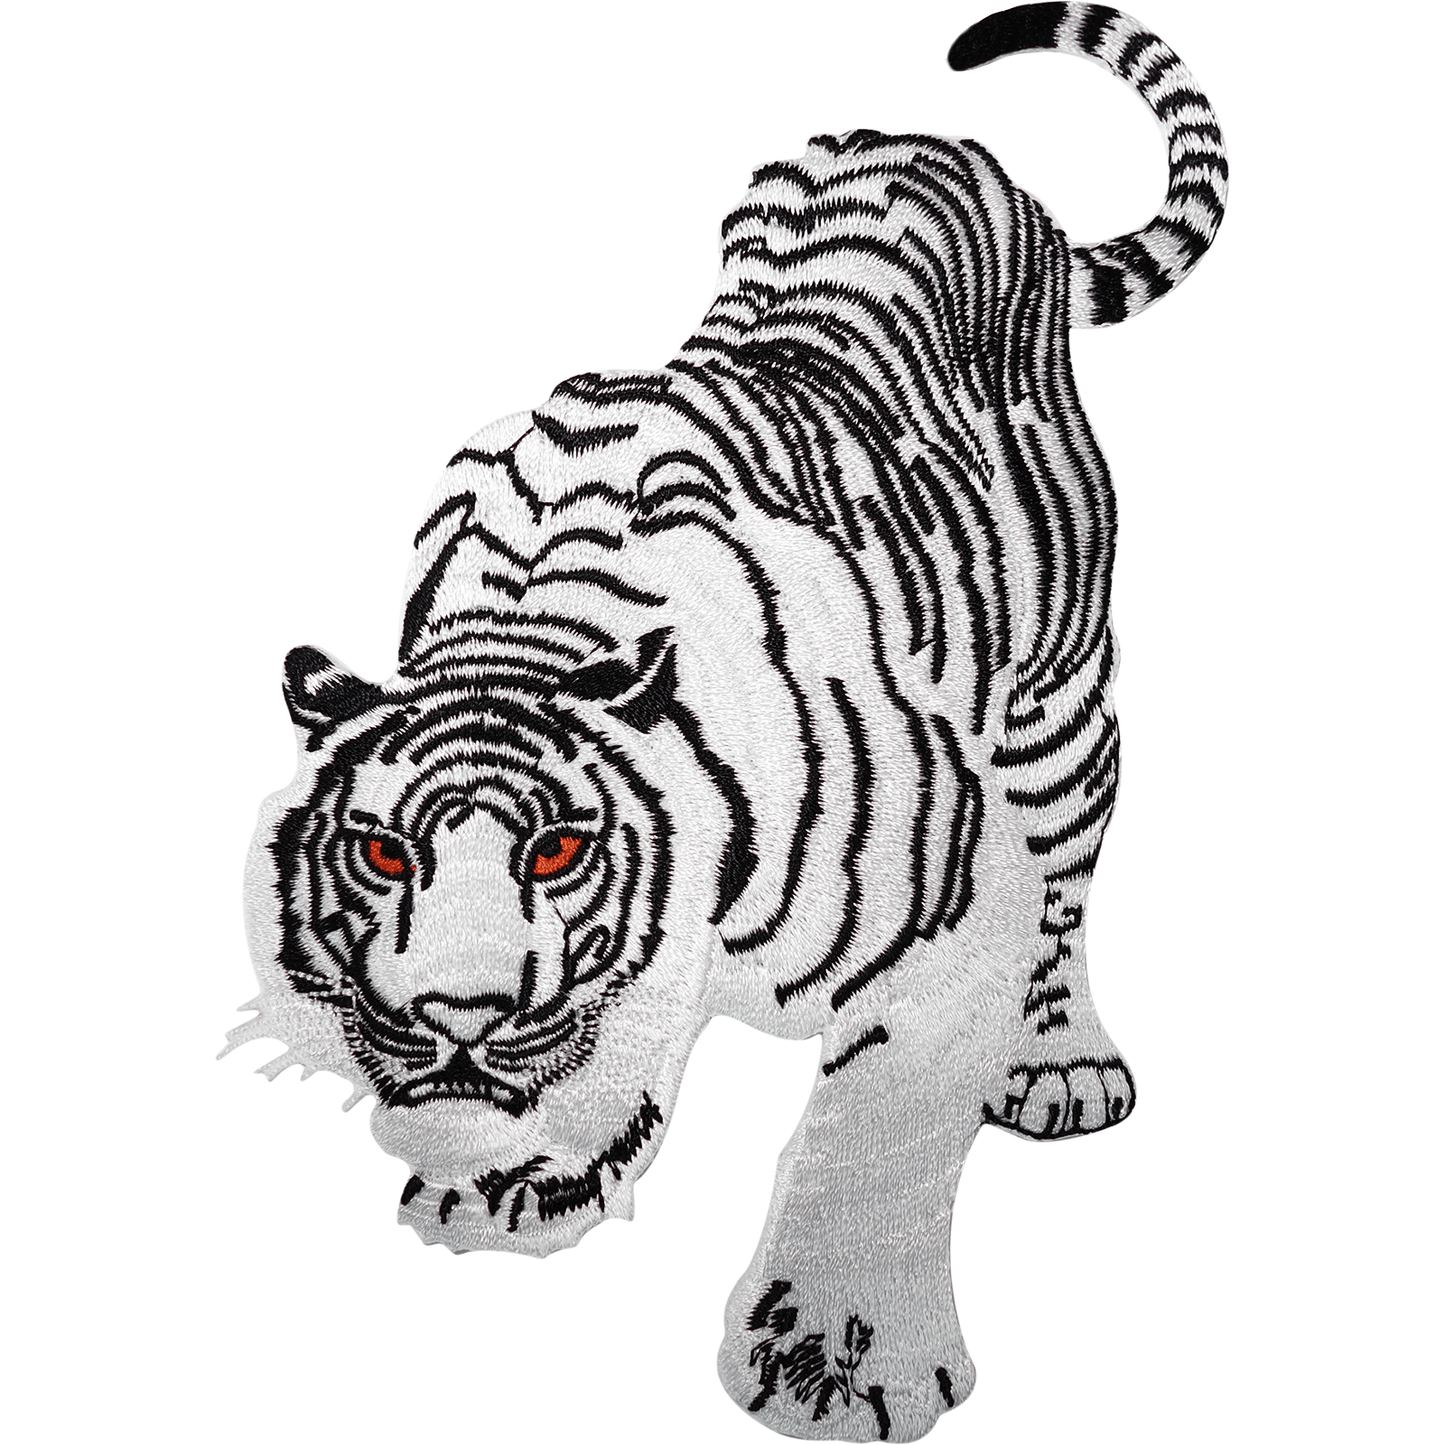 Big Large White Tiger Iron On Patch Sew On Jacket Animal Cat Embroidered Badge